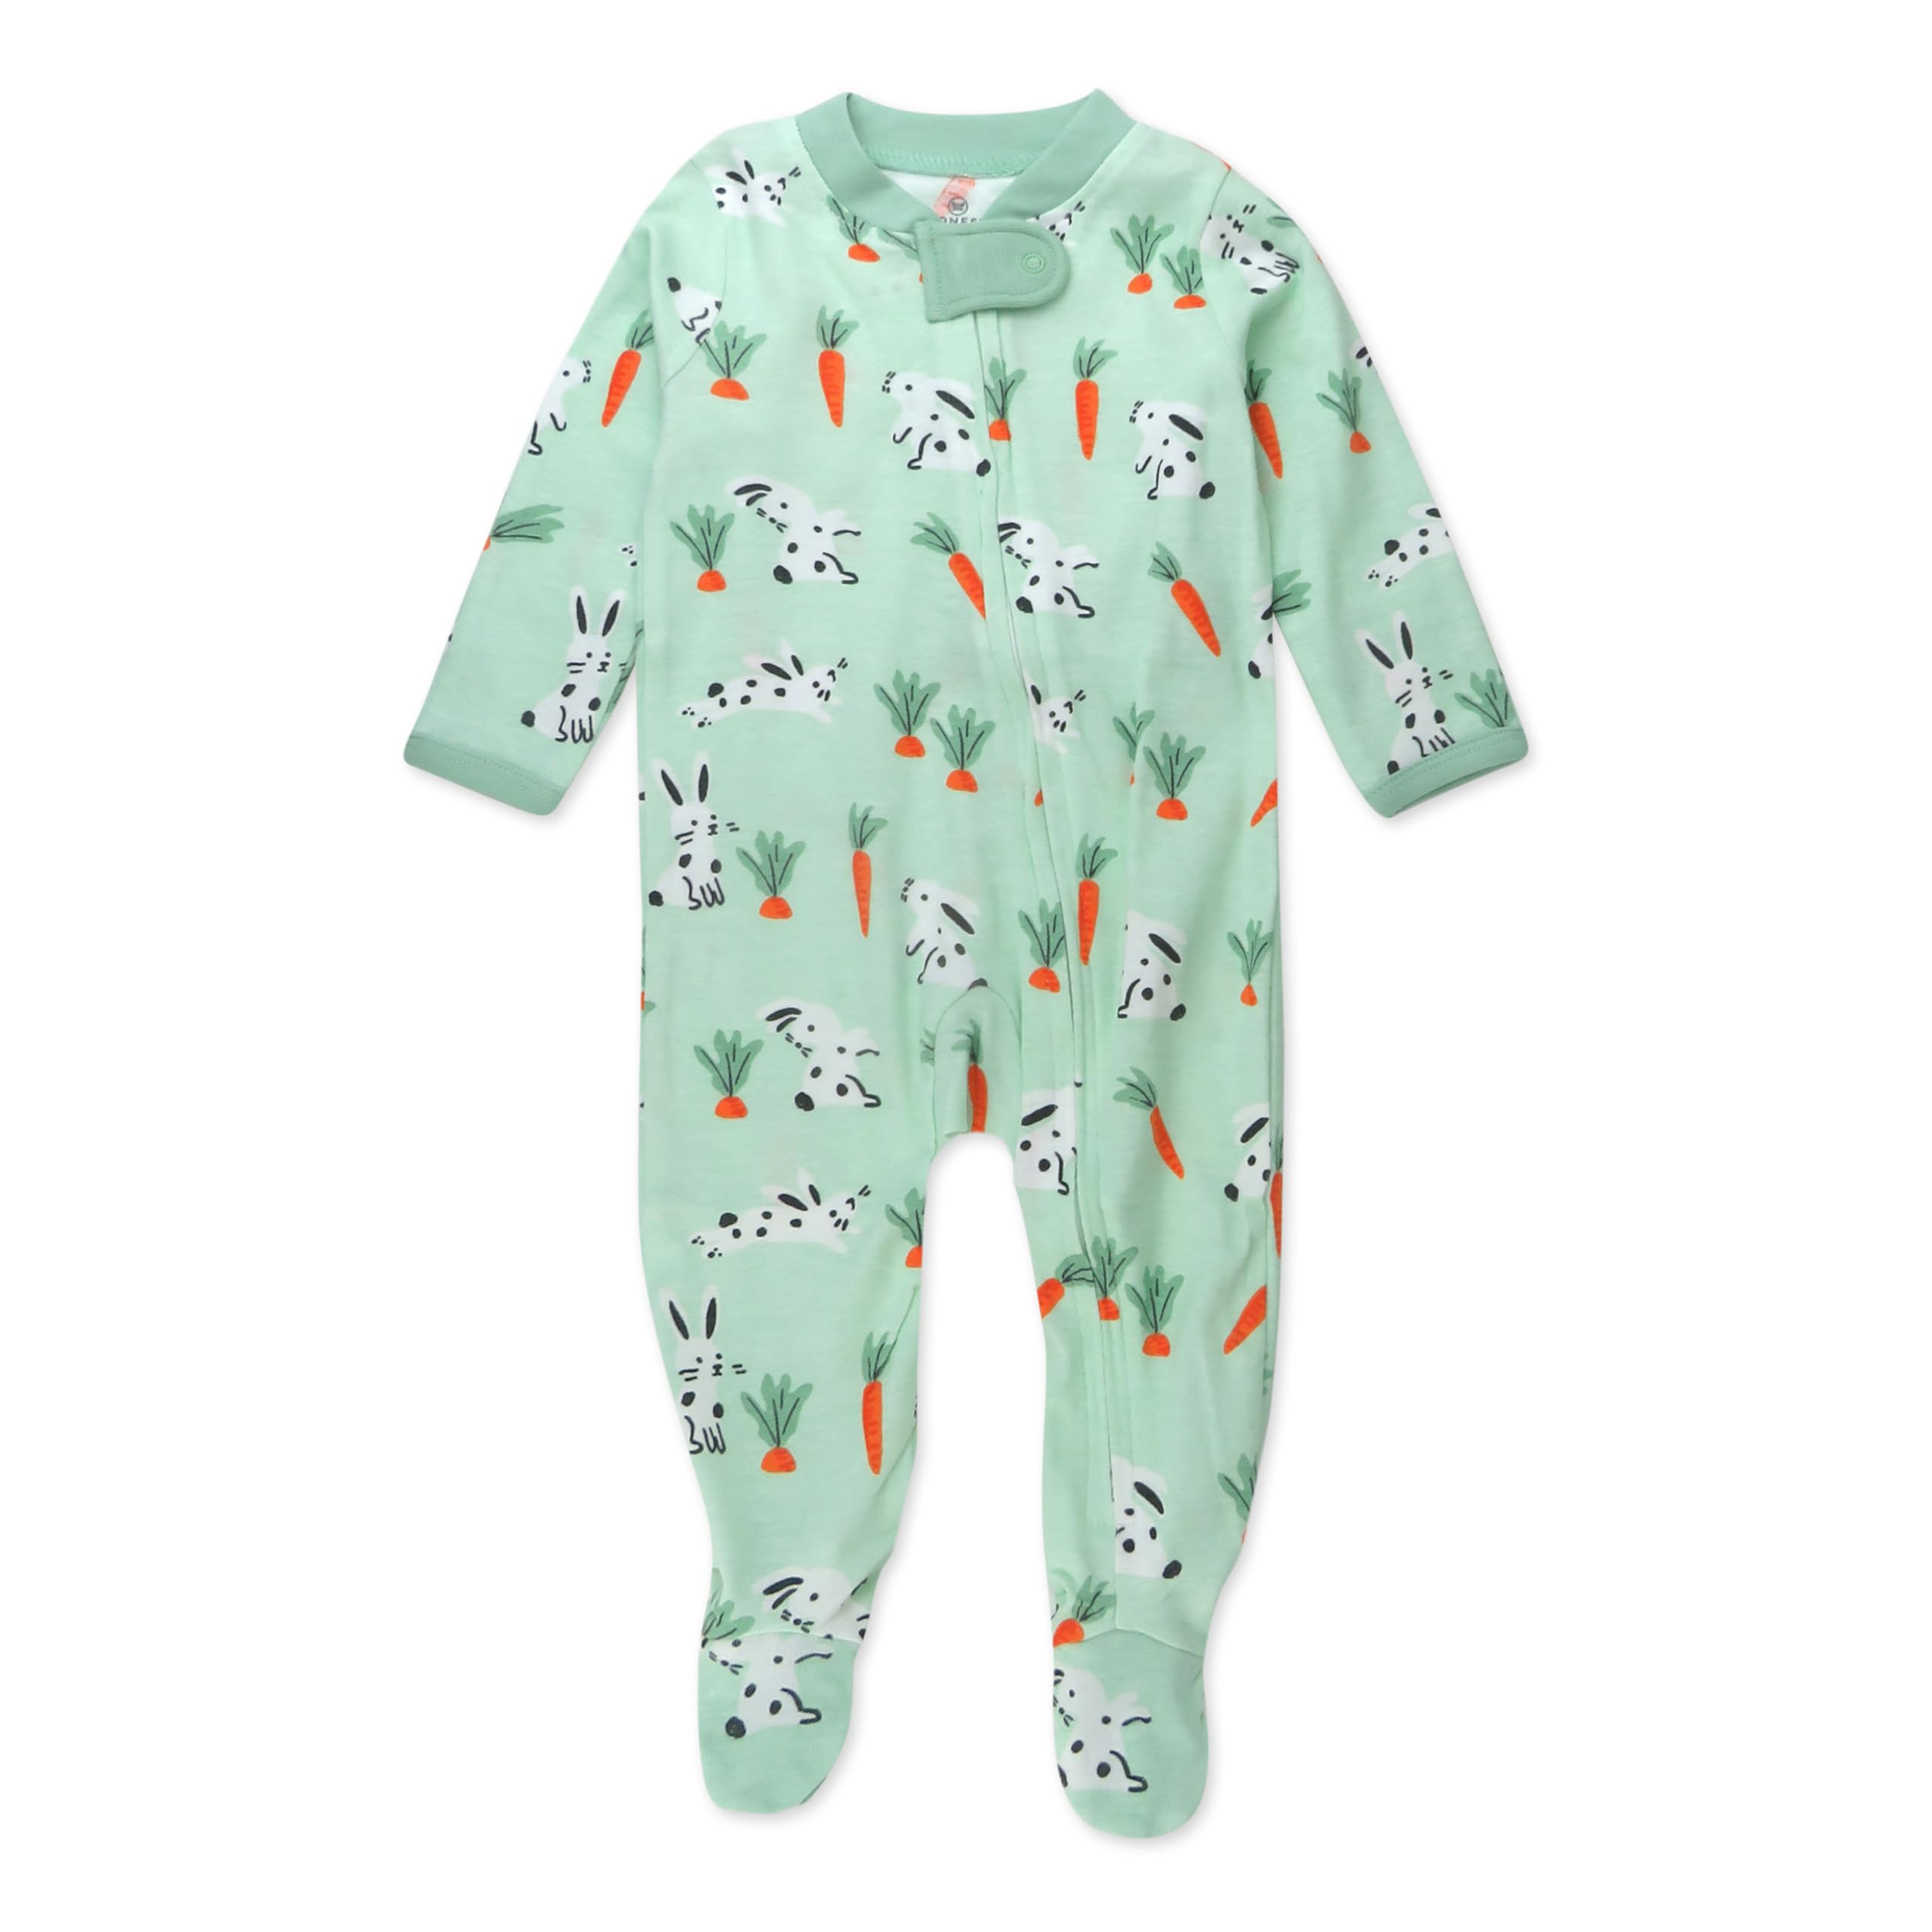 HonestBaby Sleep and Play Footed Pajamas One-Piece Sleeper Jumpsuit Zip-Front Pjs 100% Organic Cotton for Baby Girls, Dalmatian Bunny, 0-3 Months